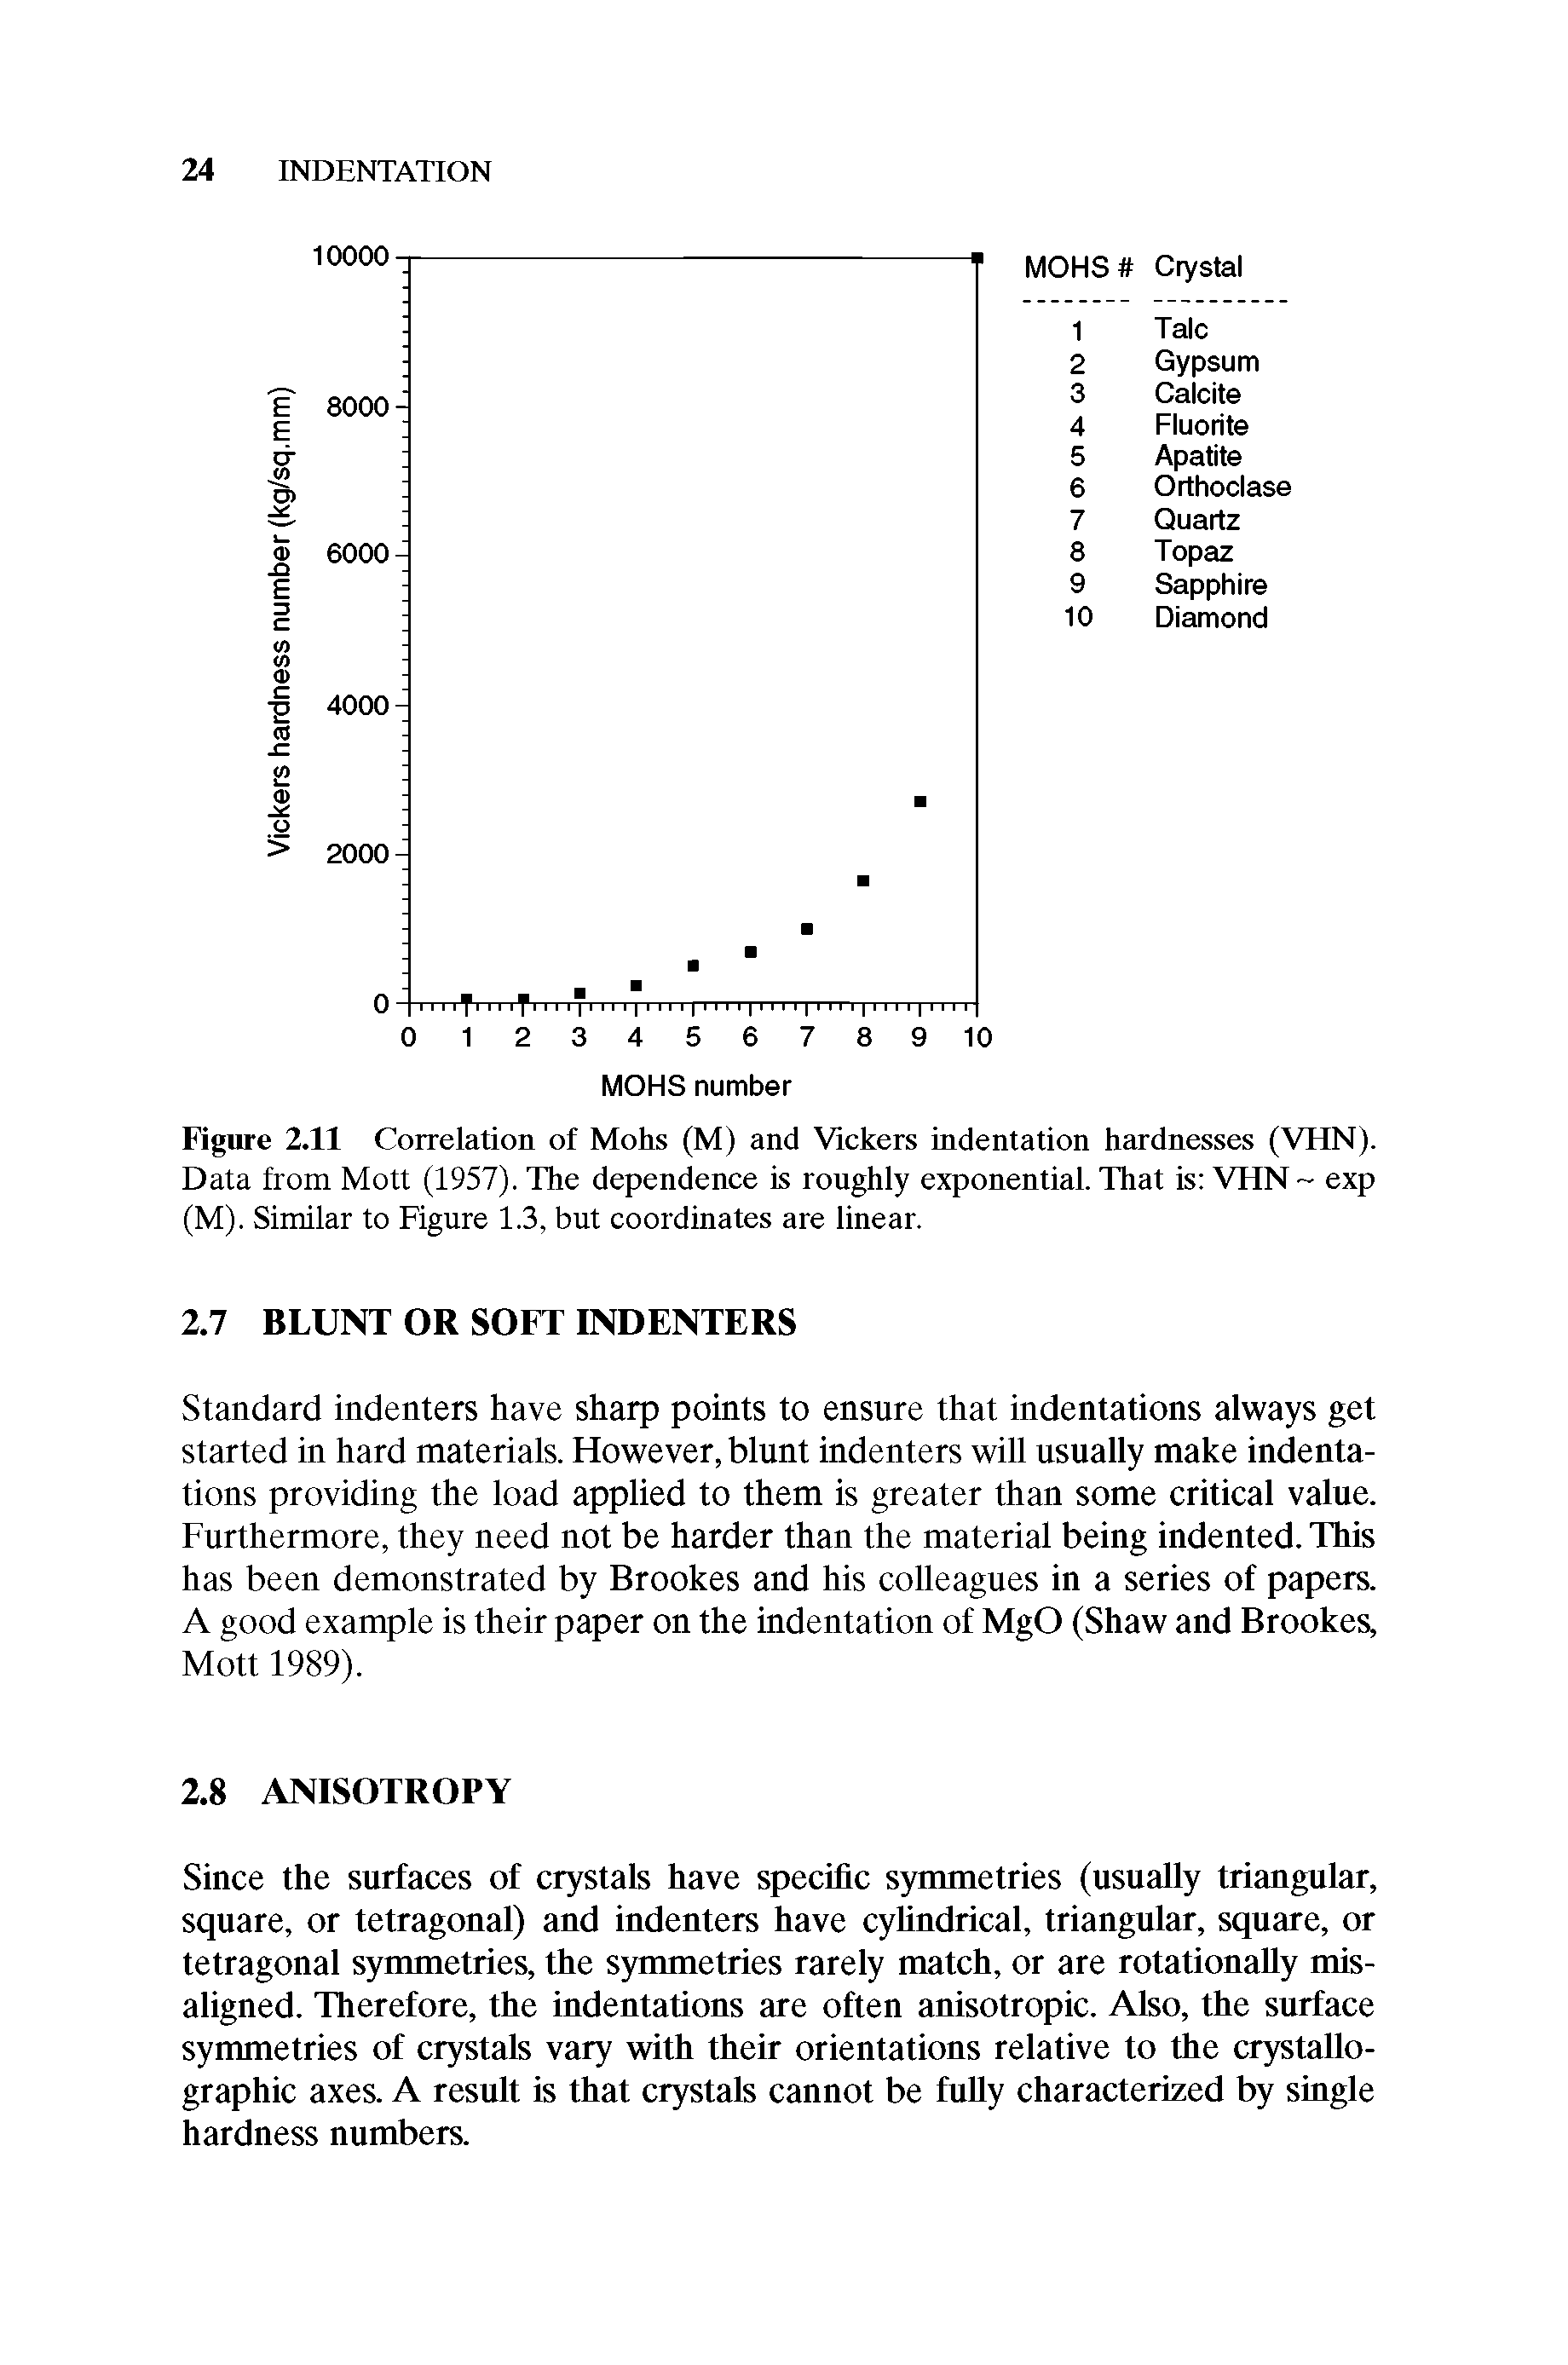 Figure 2.11 Correlation of Mohs (M) and Vickers indentation hardnesses (VHN). Data from Mott (1957). The dependence is roughly exponential. That is VHN exp (M). Similar to Figure 1.3, but coordinates are linear.